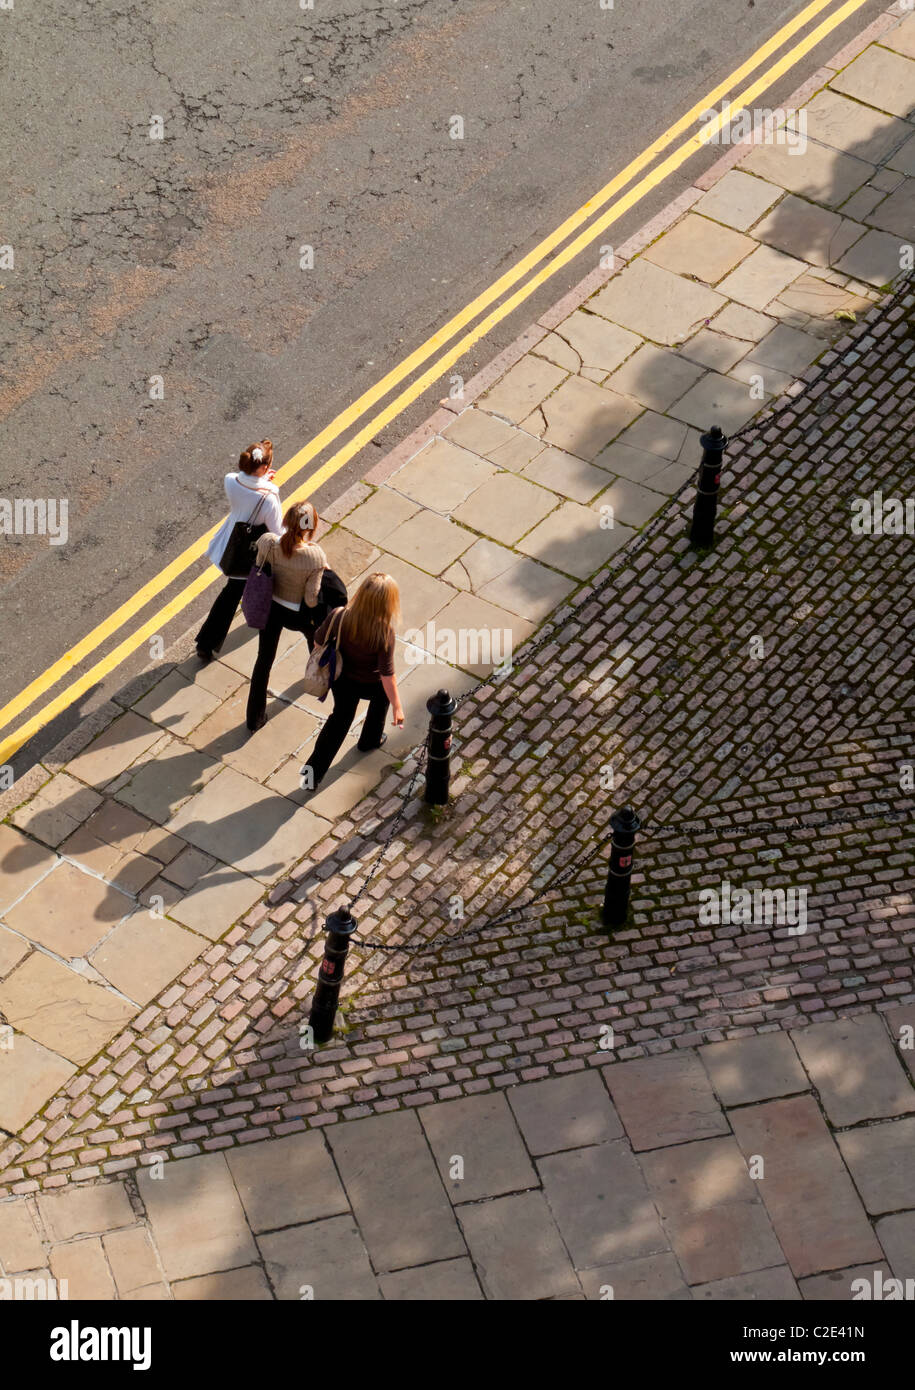 View looking down on three pedestrians walking down a street in the UK Stock Photo